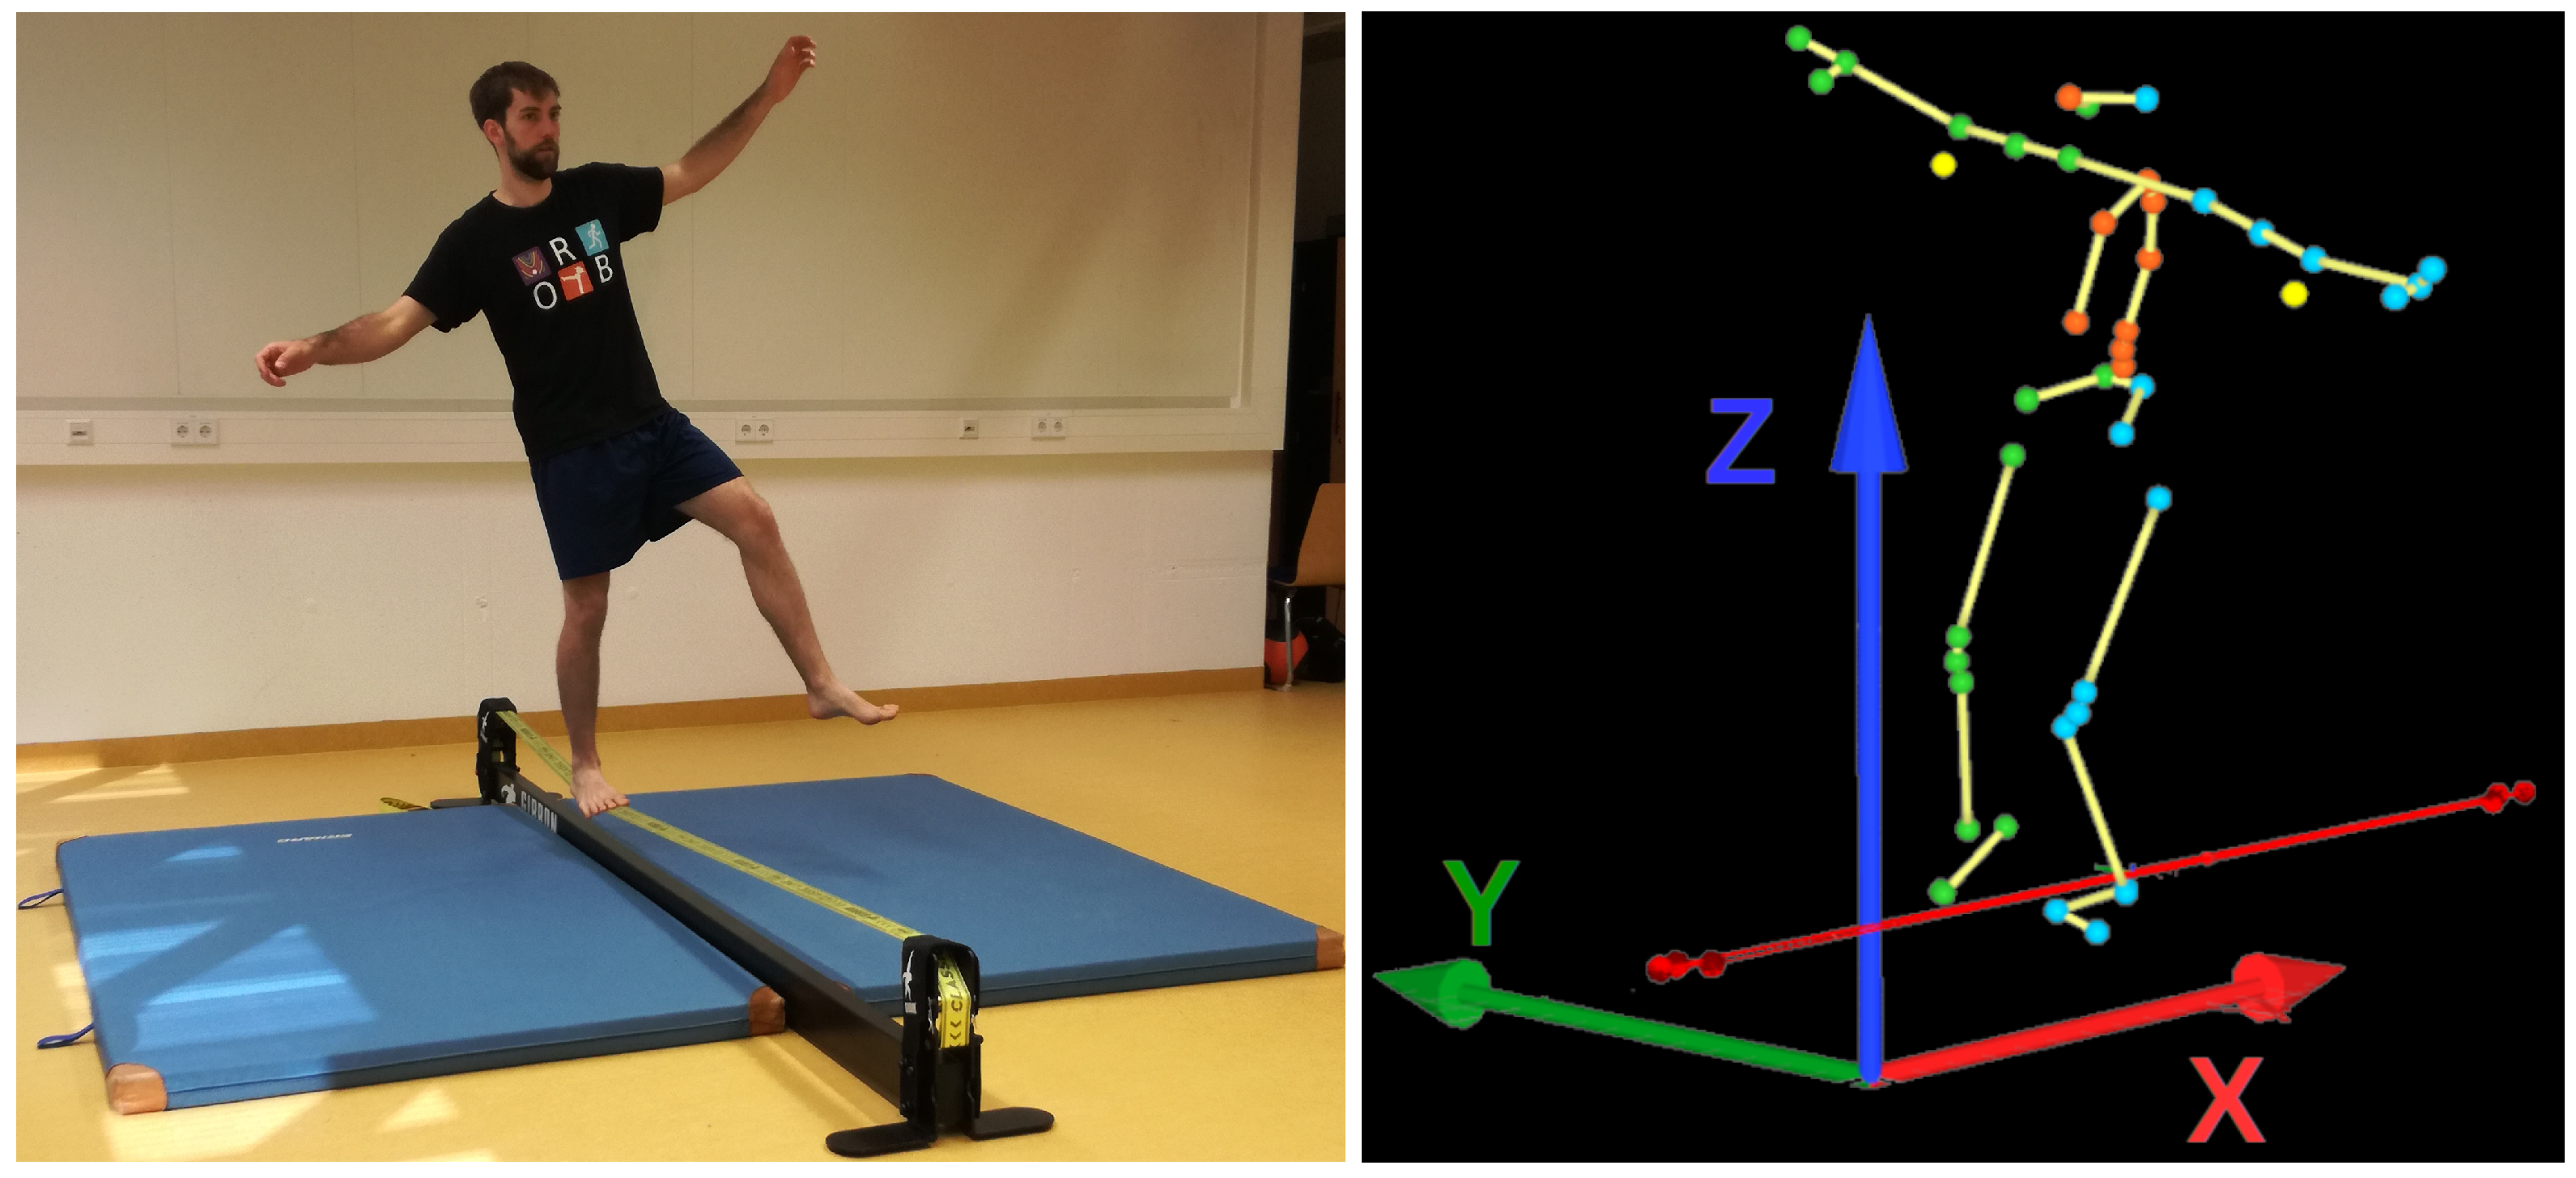 Applied Sciences | Free Full-Text | Whole-Body Dynamic Analysis of  Challenging Slackline Jumping